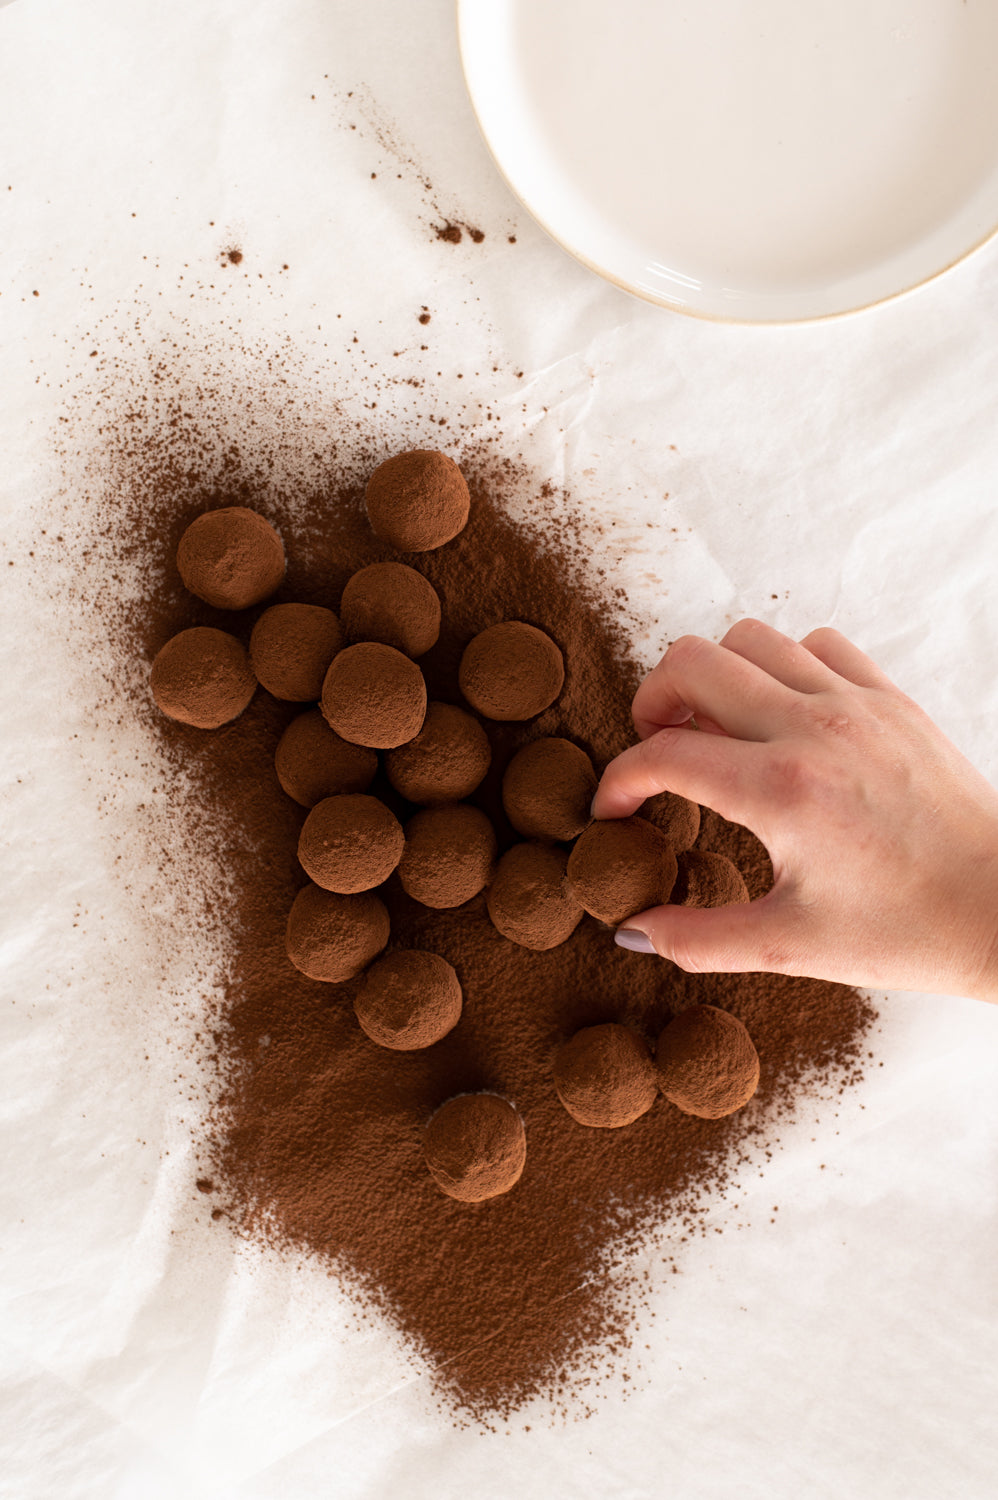 Someone taking a chocolate truffle from a pile of truffles on a table